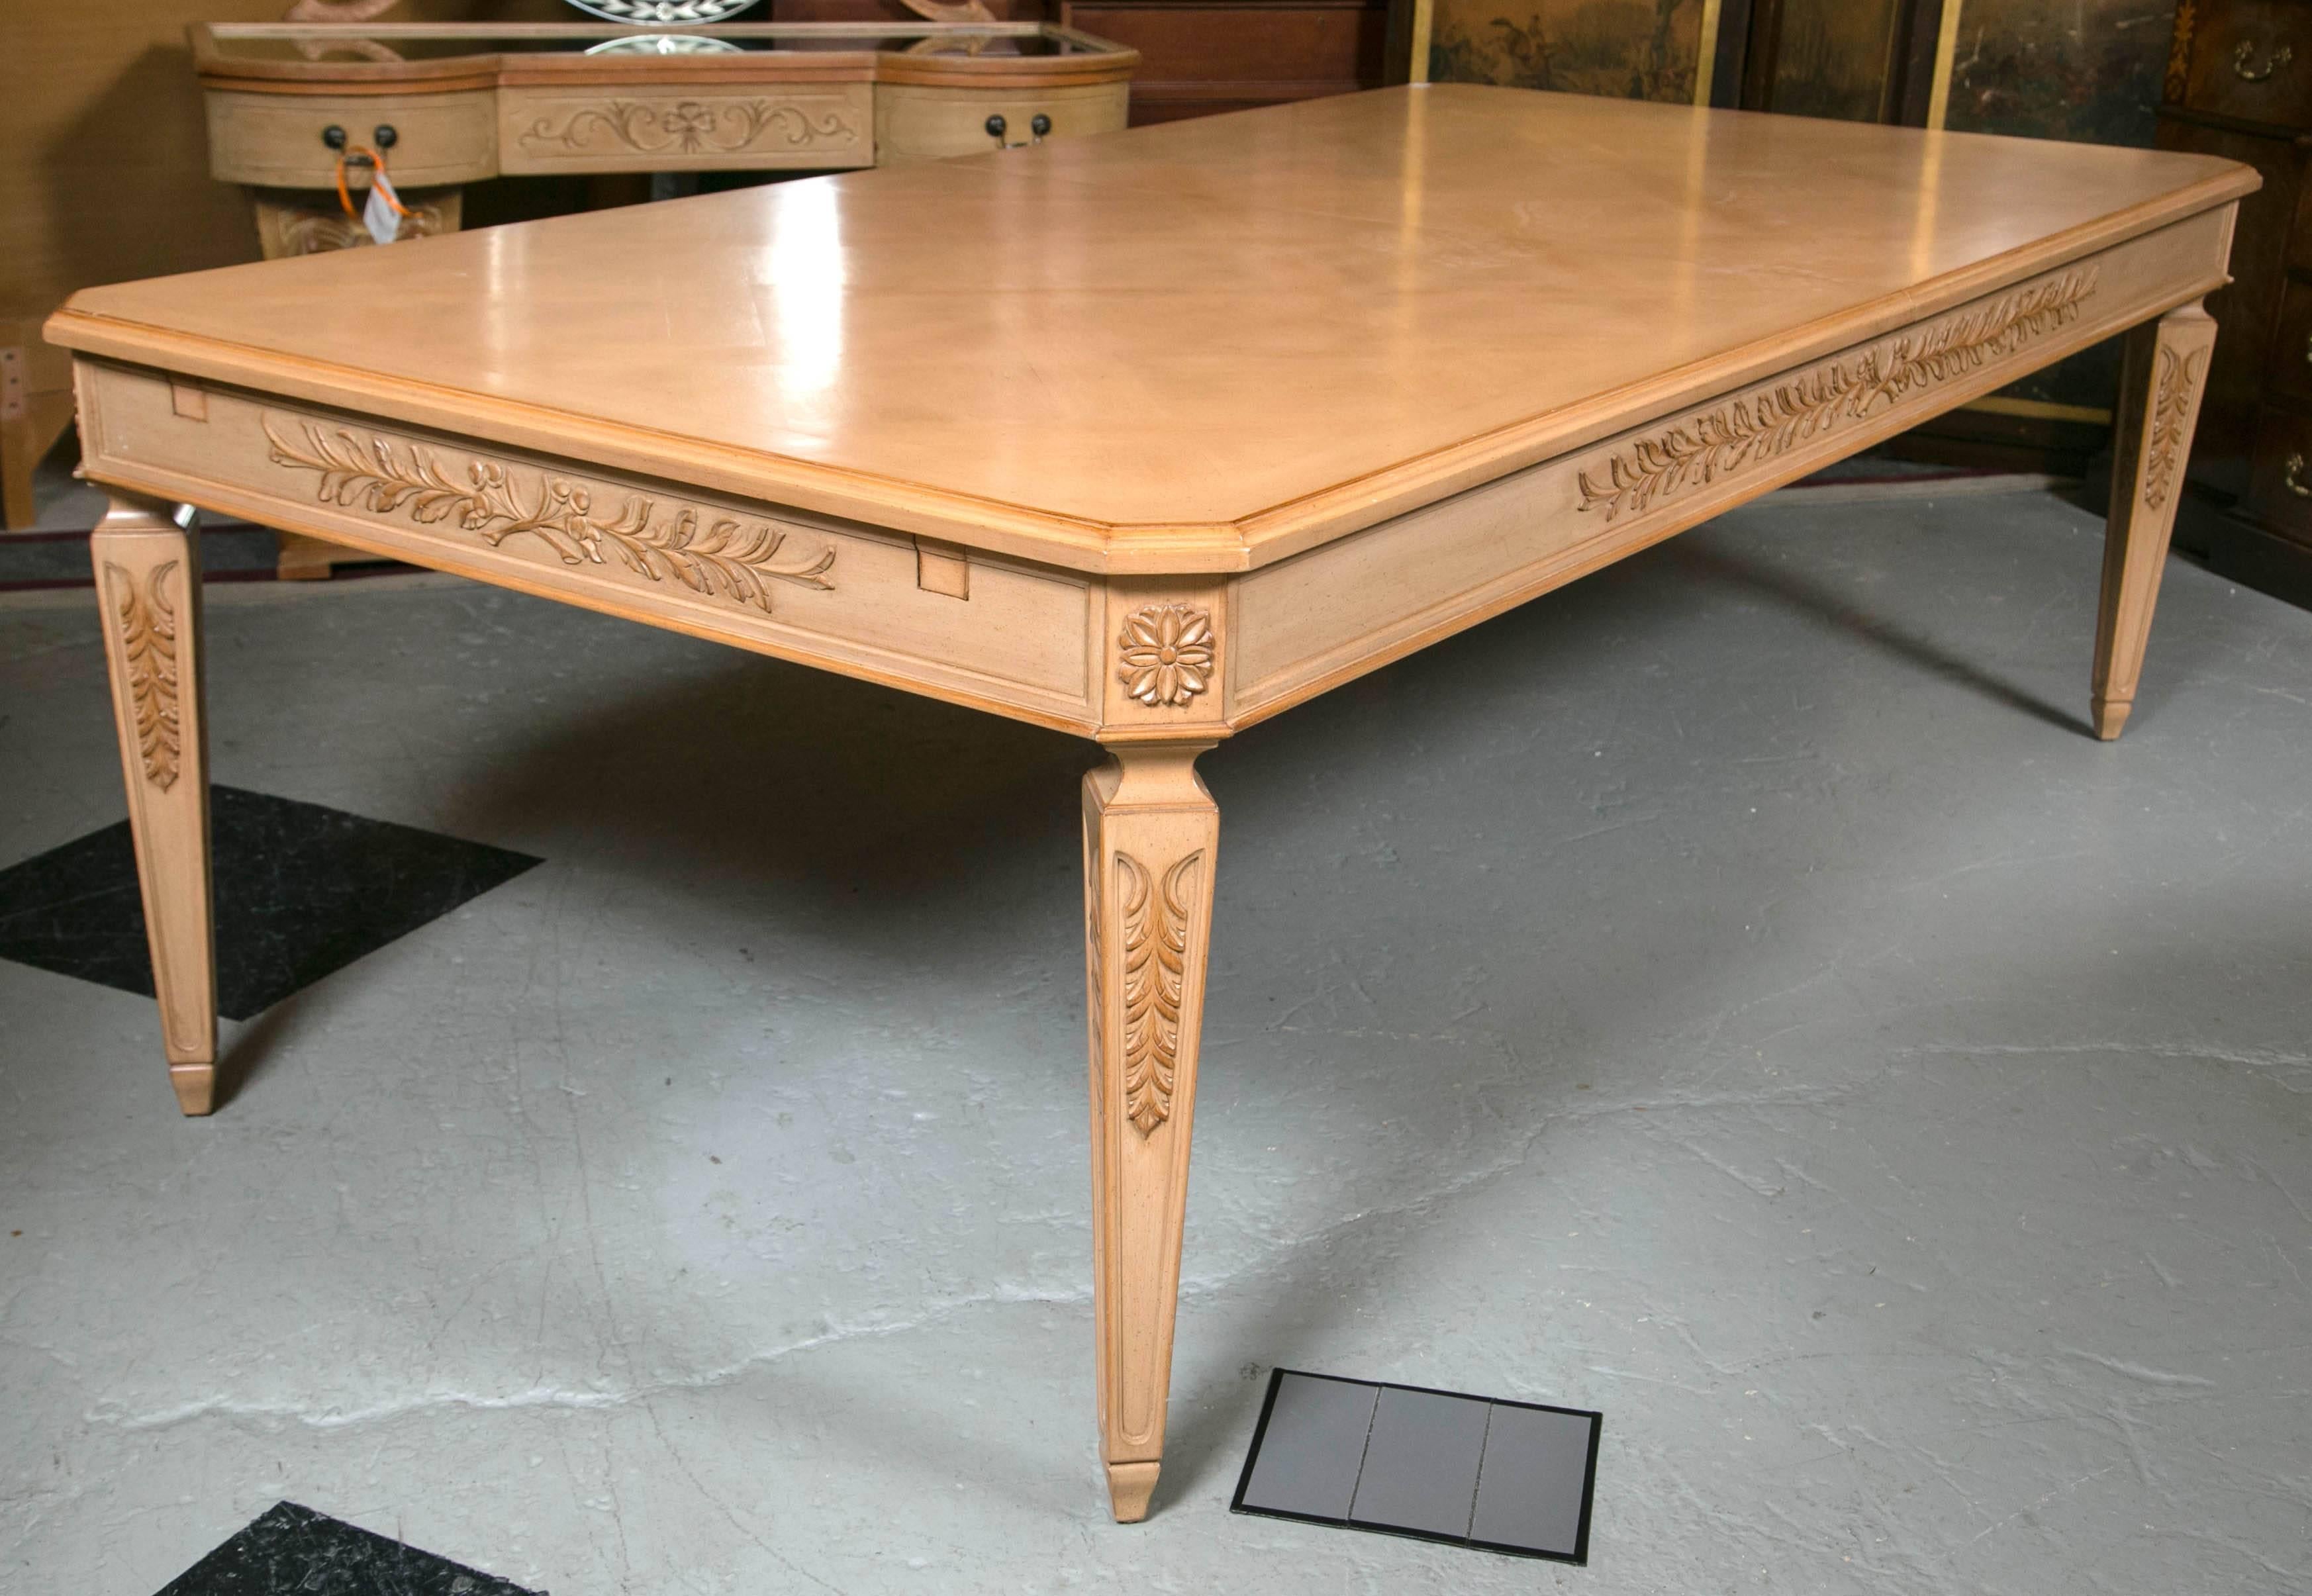 A Grosfeld House Furniture Company Monumental Louis XVI style solid blonde wooden dining table. Displaying Acanthus Leaves along the sides and top of the legs. A beautiful medallion is on all four corners giving this subtle piece the grandeur it